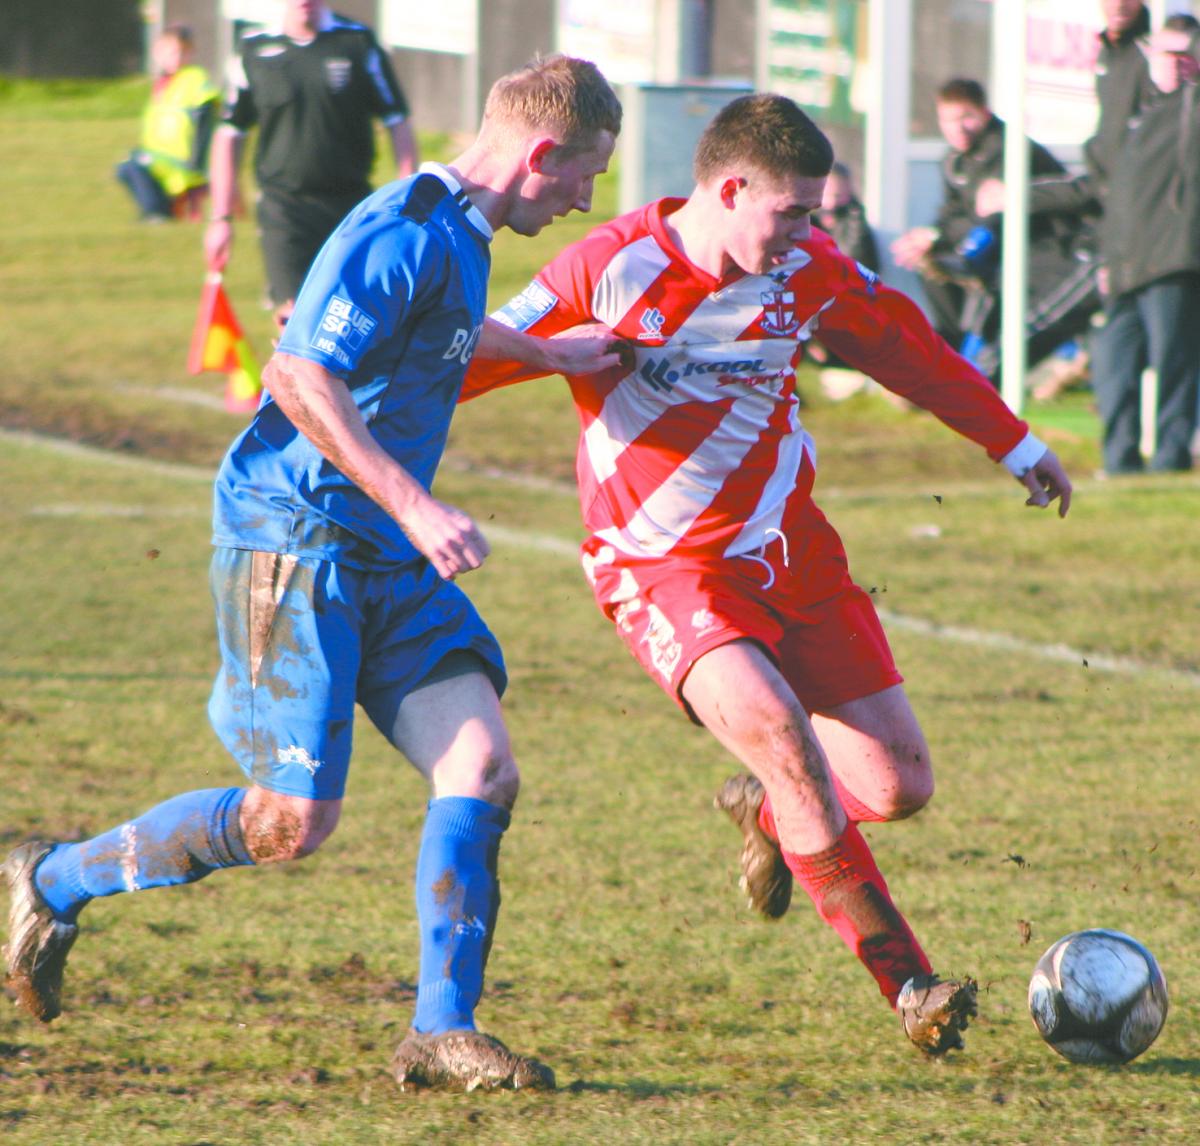 Redditch lose heavily at home